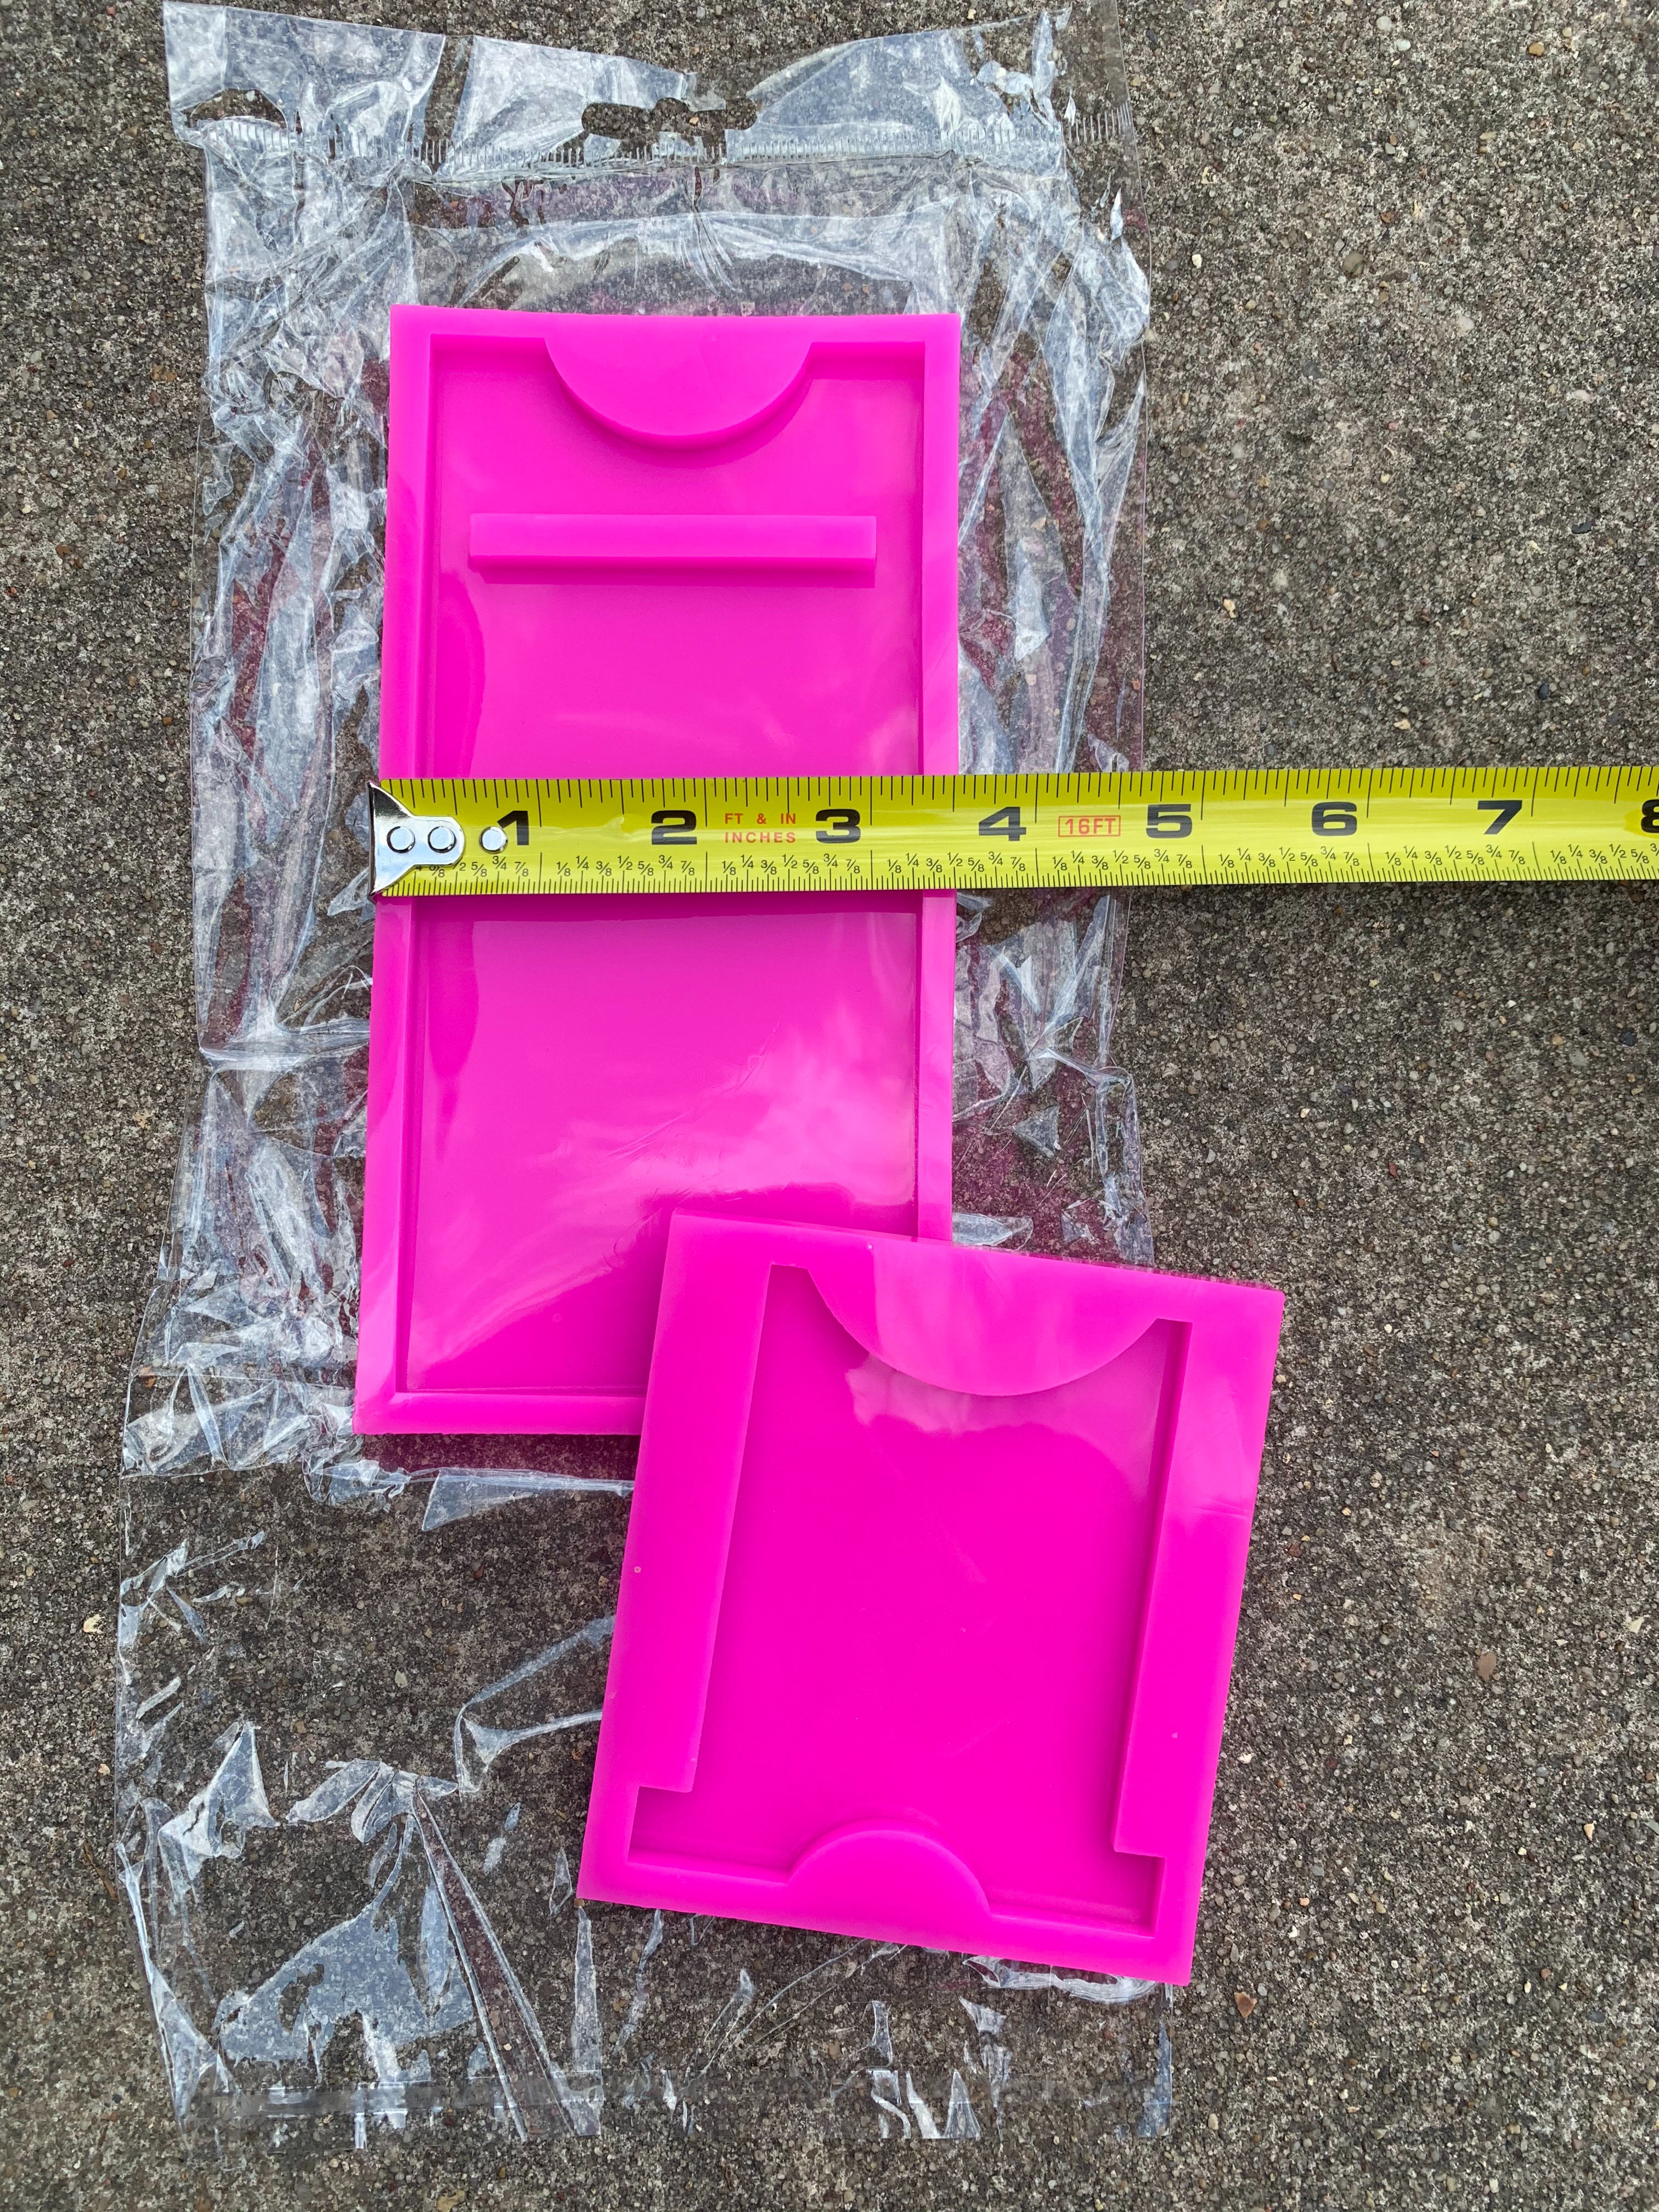 resin silicone phone mold mould